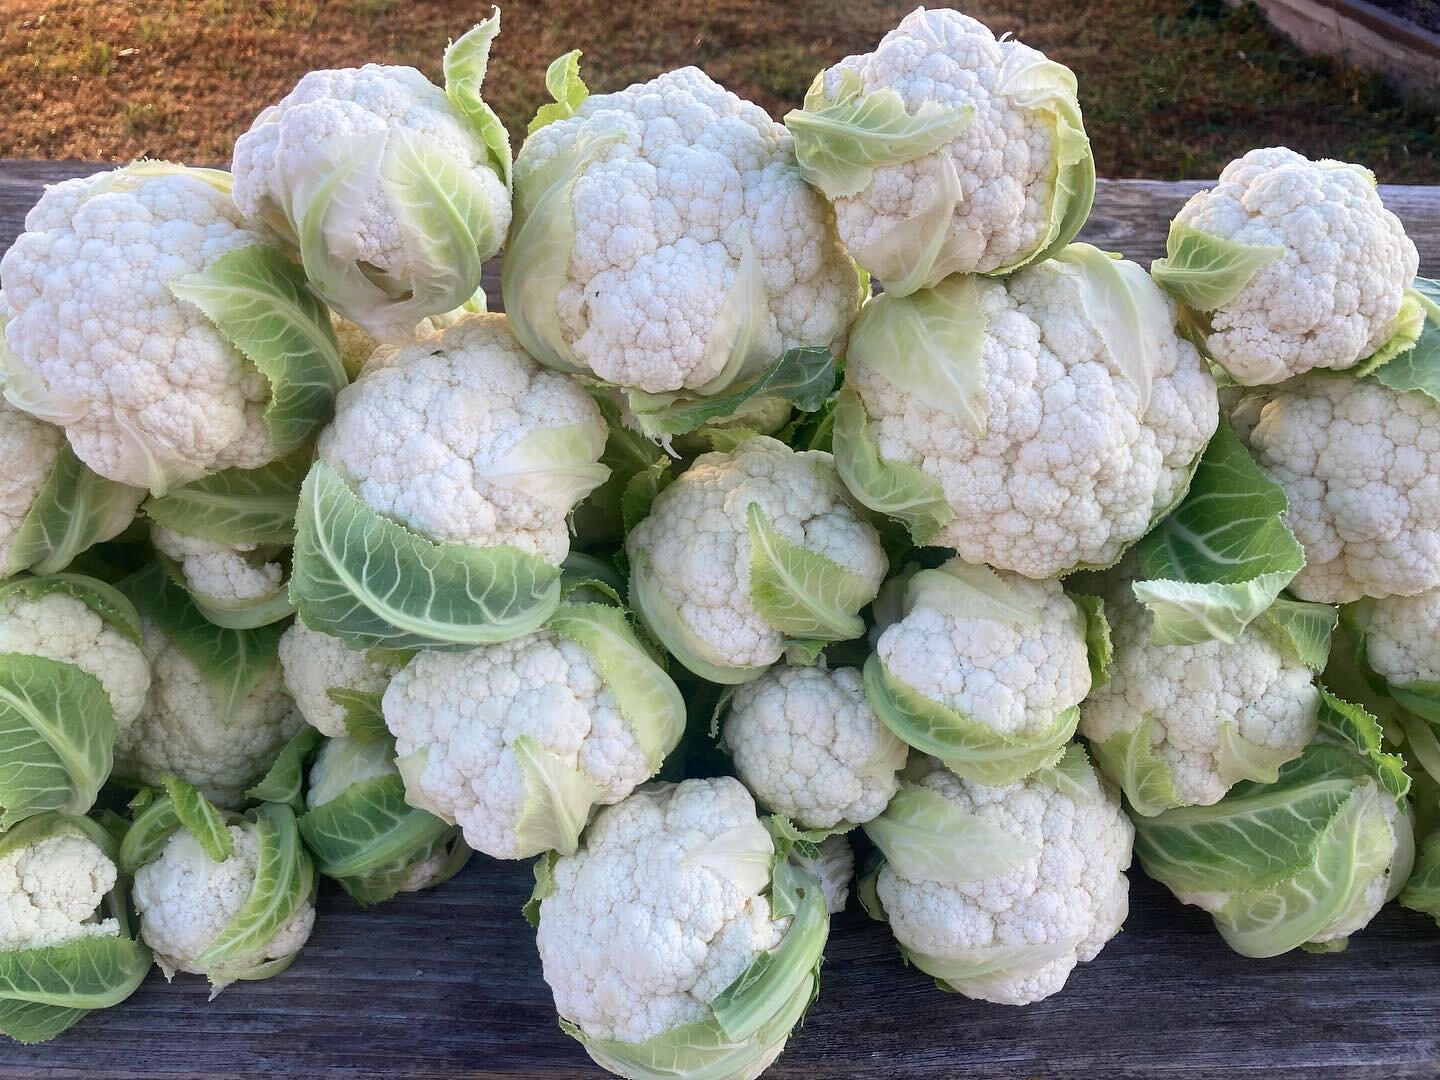 Market season isn&rsquo;t over! Join us this Saturday for the first Landrum Holiday Market, now with new hours: 9am-1pm. We&rsquo;ll be there with this beautiful cauliflower, broccoli, lettuce, hakurei turnips, cherry tomatoes, sweet peppers, arugula